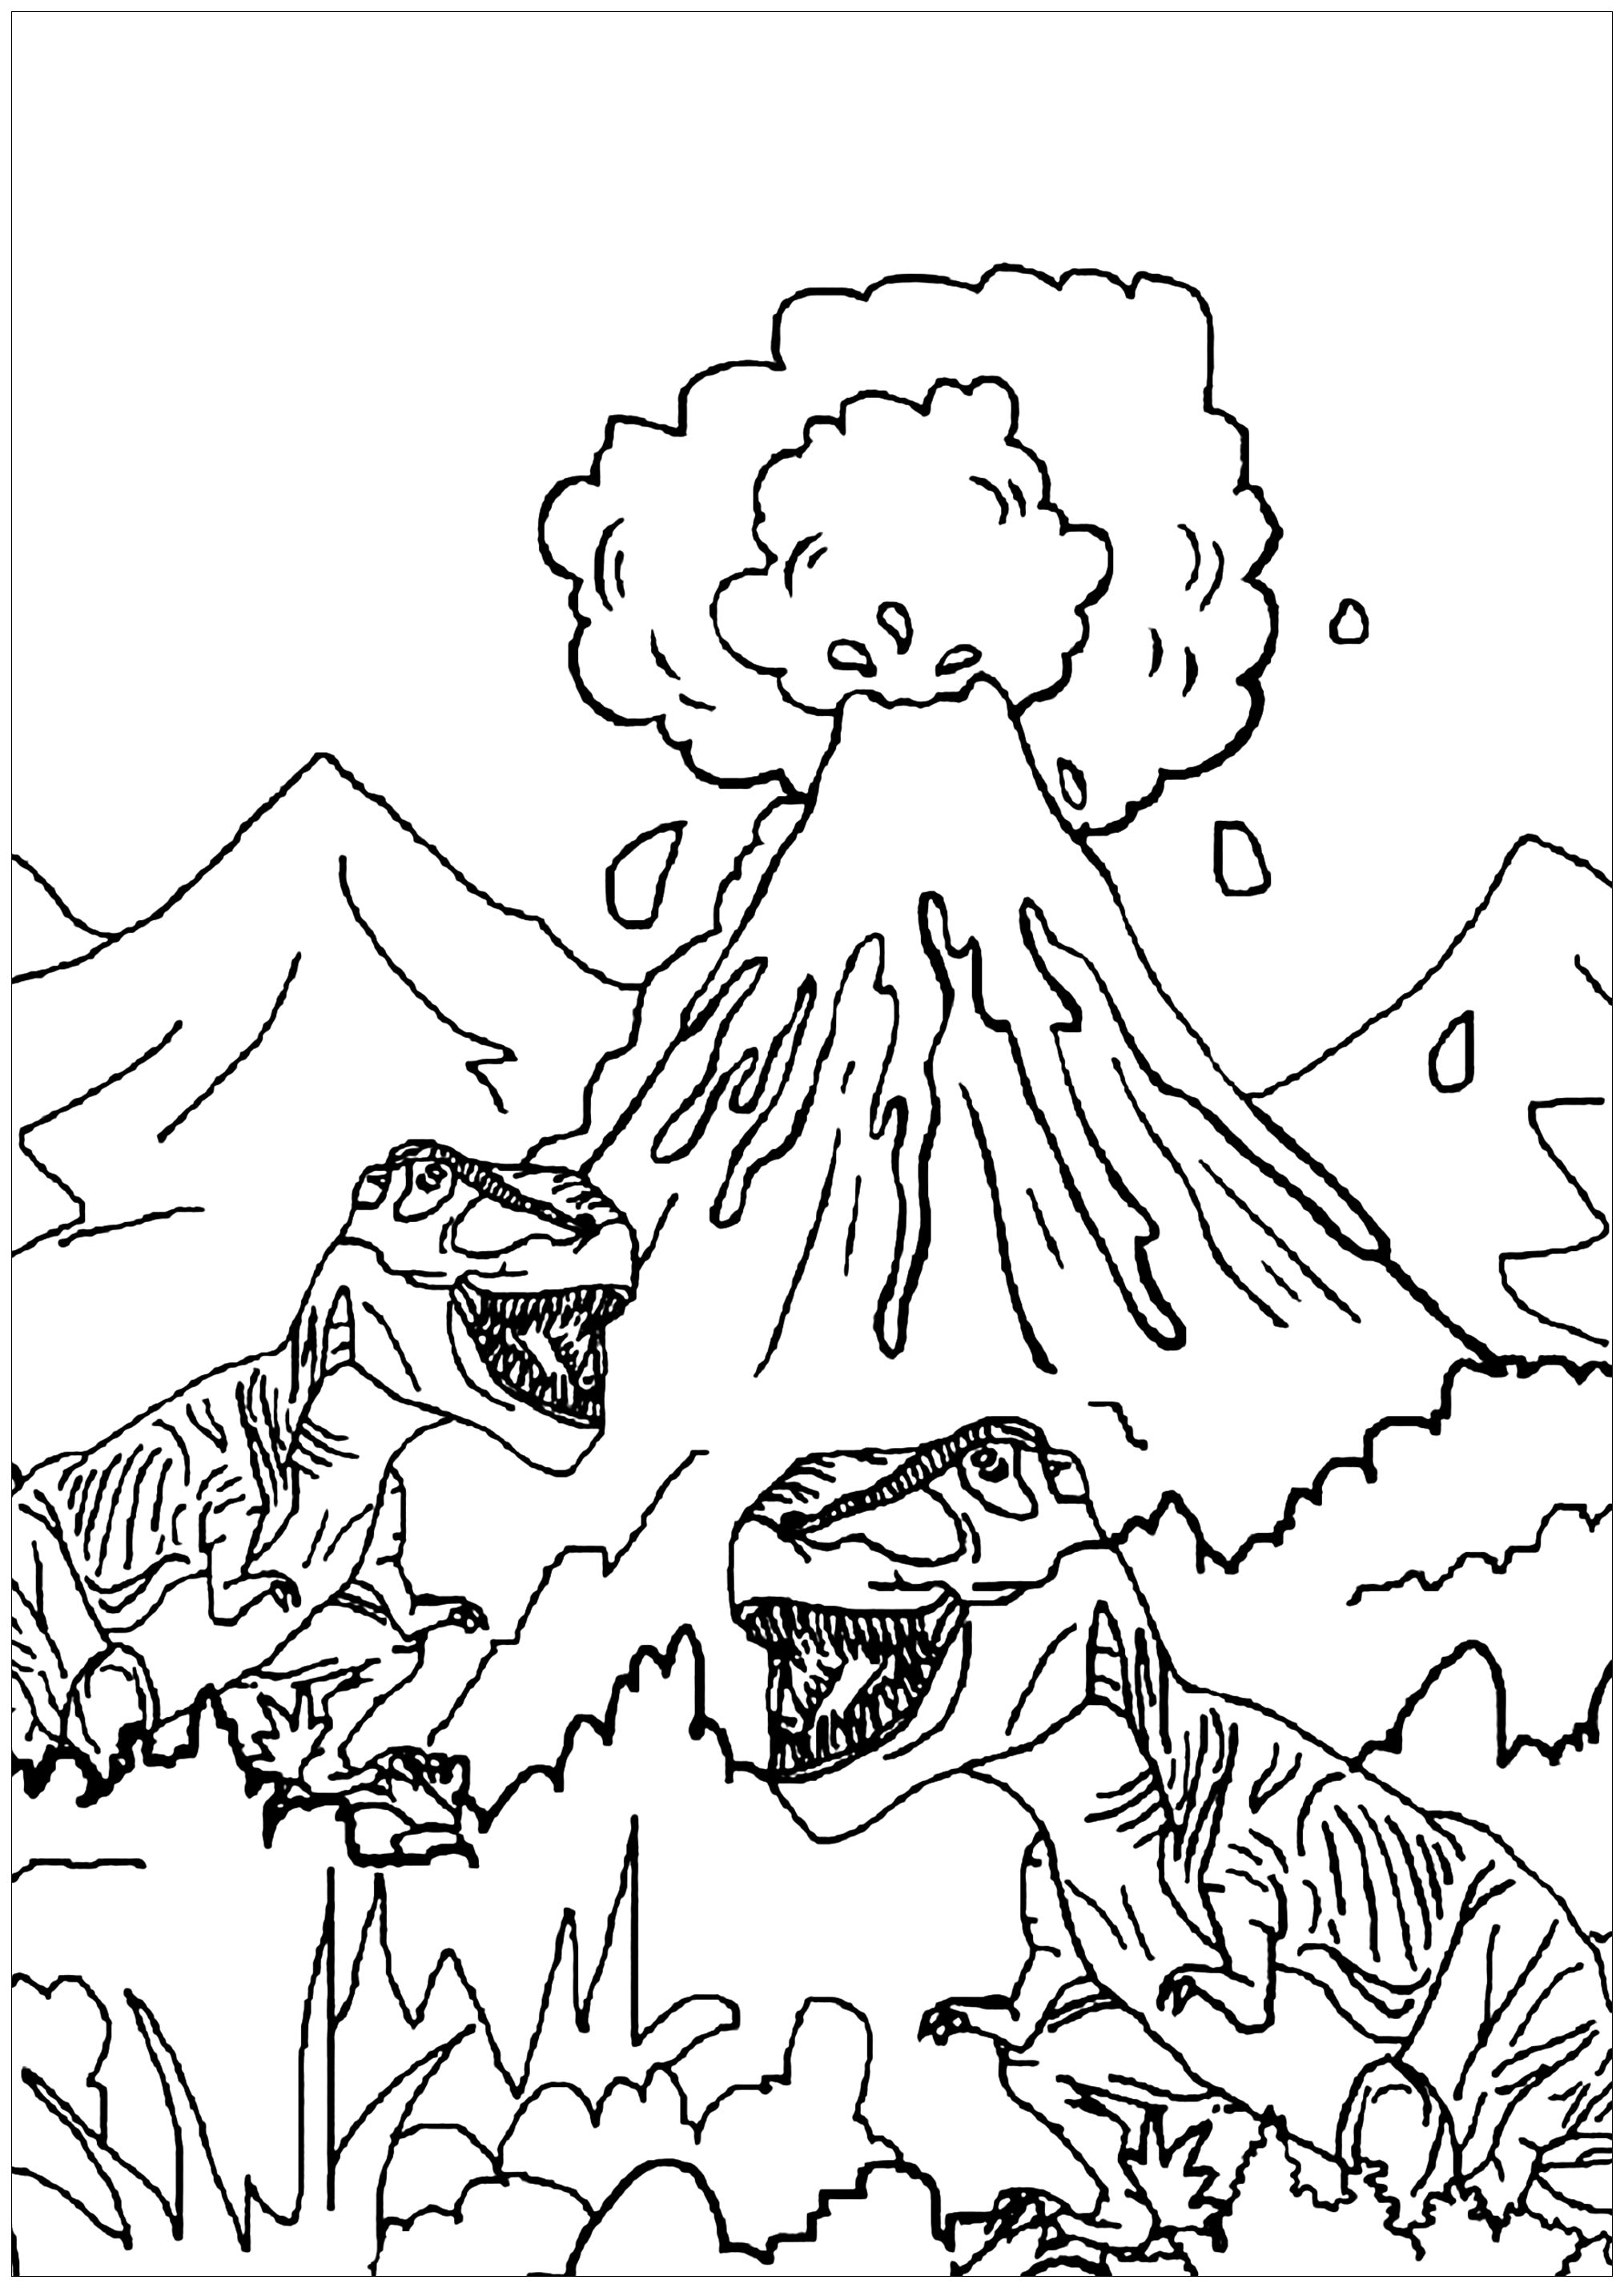 These two tyrannosaurs walk around a volcano